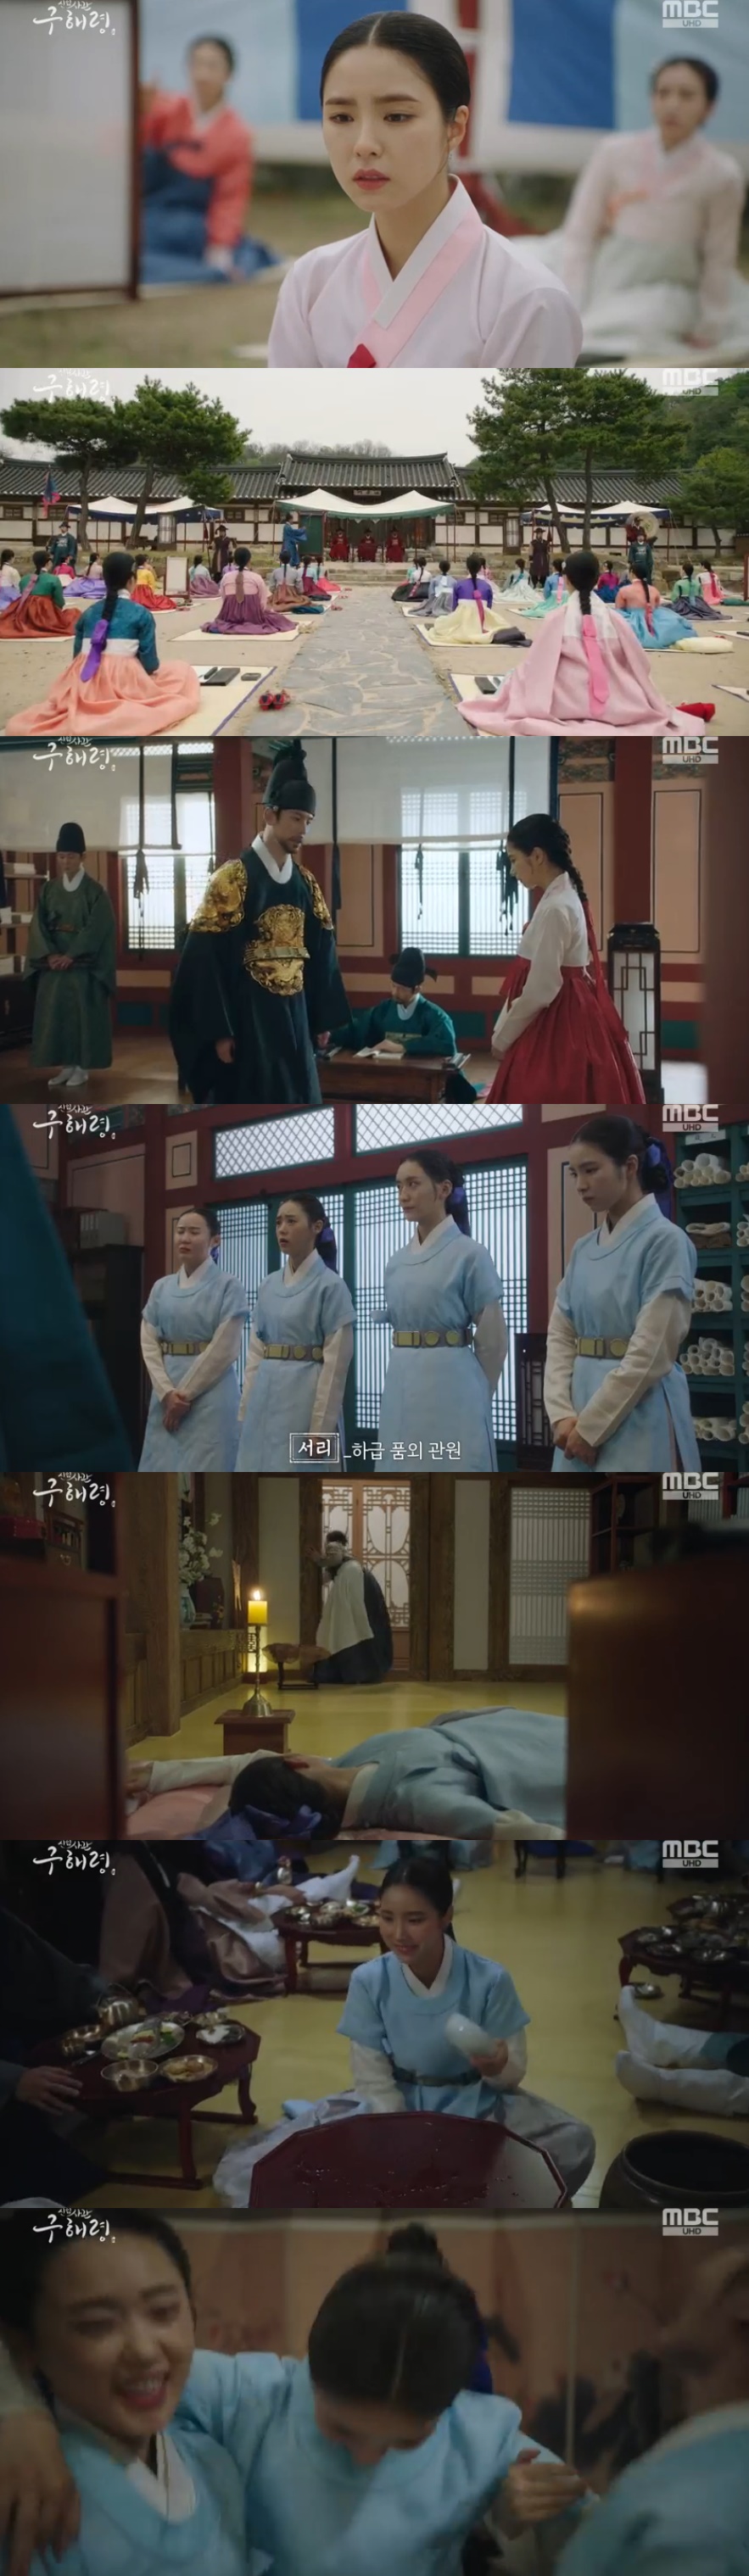 Can the new officer Na Hae-ryung Shin Se-kyung pioneer the path of a tough officer?In the MBC drama Na Hae-ryung, which was broadcast on the afternoon of the 24th, the figure of Na Hae-ryung (Shin Se-kyung), who passed the movie at a different time and became a military officer, was drawn.When he learned that a separate event was to be held to select female officers, he visited the Seung-Hoon Lee (Seo Young-joo) the night before Wedding Bible.Na Hae-ryung, who said, I came to you knowing it was a great excuse. Im sorry to surprise you. He knelt down and said, Please leave the marriage.I can not make a innocent Sunbee a man who has been dismissed. Seung-Hoon Lee said: Have you done anything wrong with the lunatic in our family?I was wrong, I tried to accept it. I tried to think it was fate, said Na Hae-ryung.But my heart is not like my heart. I am not confident that I will live my whole life as an innocent GLOW in the rites. Seung-Hoon Lee said: If I turn down the nanza on my side, the nanza will be pointed out for life as the broken GLOW; you wont be able to save the nanza.So you did not like this marriage until then. The next day, Seung-Hoon Lee shouted, I can not marry this marriage as soon as Wedding Bible began, as asked by Na Hae-ryung.Na Hae-ryung smiled at the sound and ran straight to the test site.Later, Na Hae-ryung passed the extraordinary and became a female officer; however, the officials ignored the first ladies; and Koo Na Hae-ryung said, I will work hard.Please teach me to be a good officer. Min Woo-won told Na Hae-ryung, You are not a officer. The first ladies took charge of the remorse, and they thought that the reason they were ignored while talking was because they did not do the ceremony, which was a ceremony for the new officers.I have seen the past, but I have seen it, the women said. If you are right, if you dance, you will dance and take off if you take off.At the scene of the ceremony, Hanlims recommended Kwon Ji to drink. After drinking instead, Koo Hae-ryung, who was in trouble and drinking, said, I am as harassed as I love you.Please accept the glass, he said, recommending a drink to Yang Si-haeng (Heo Jeong-jung), who unintentionally had a drinking showdown, and Yang Si-haeng fell drunk.Na Hae-ryung, who was ignored from her first day of work because she was a woman.However, he has already given up on Wedding Bible and has entered the palace, and has been firmly and firmly committed to the mischievous harassment of his seniors.Can the old Na Hae-ryung, who is already a brilliant man and a brilliant man, become a good officer as he is determined to be?Photo  MBC Broadcasting Screen